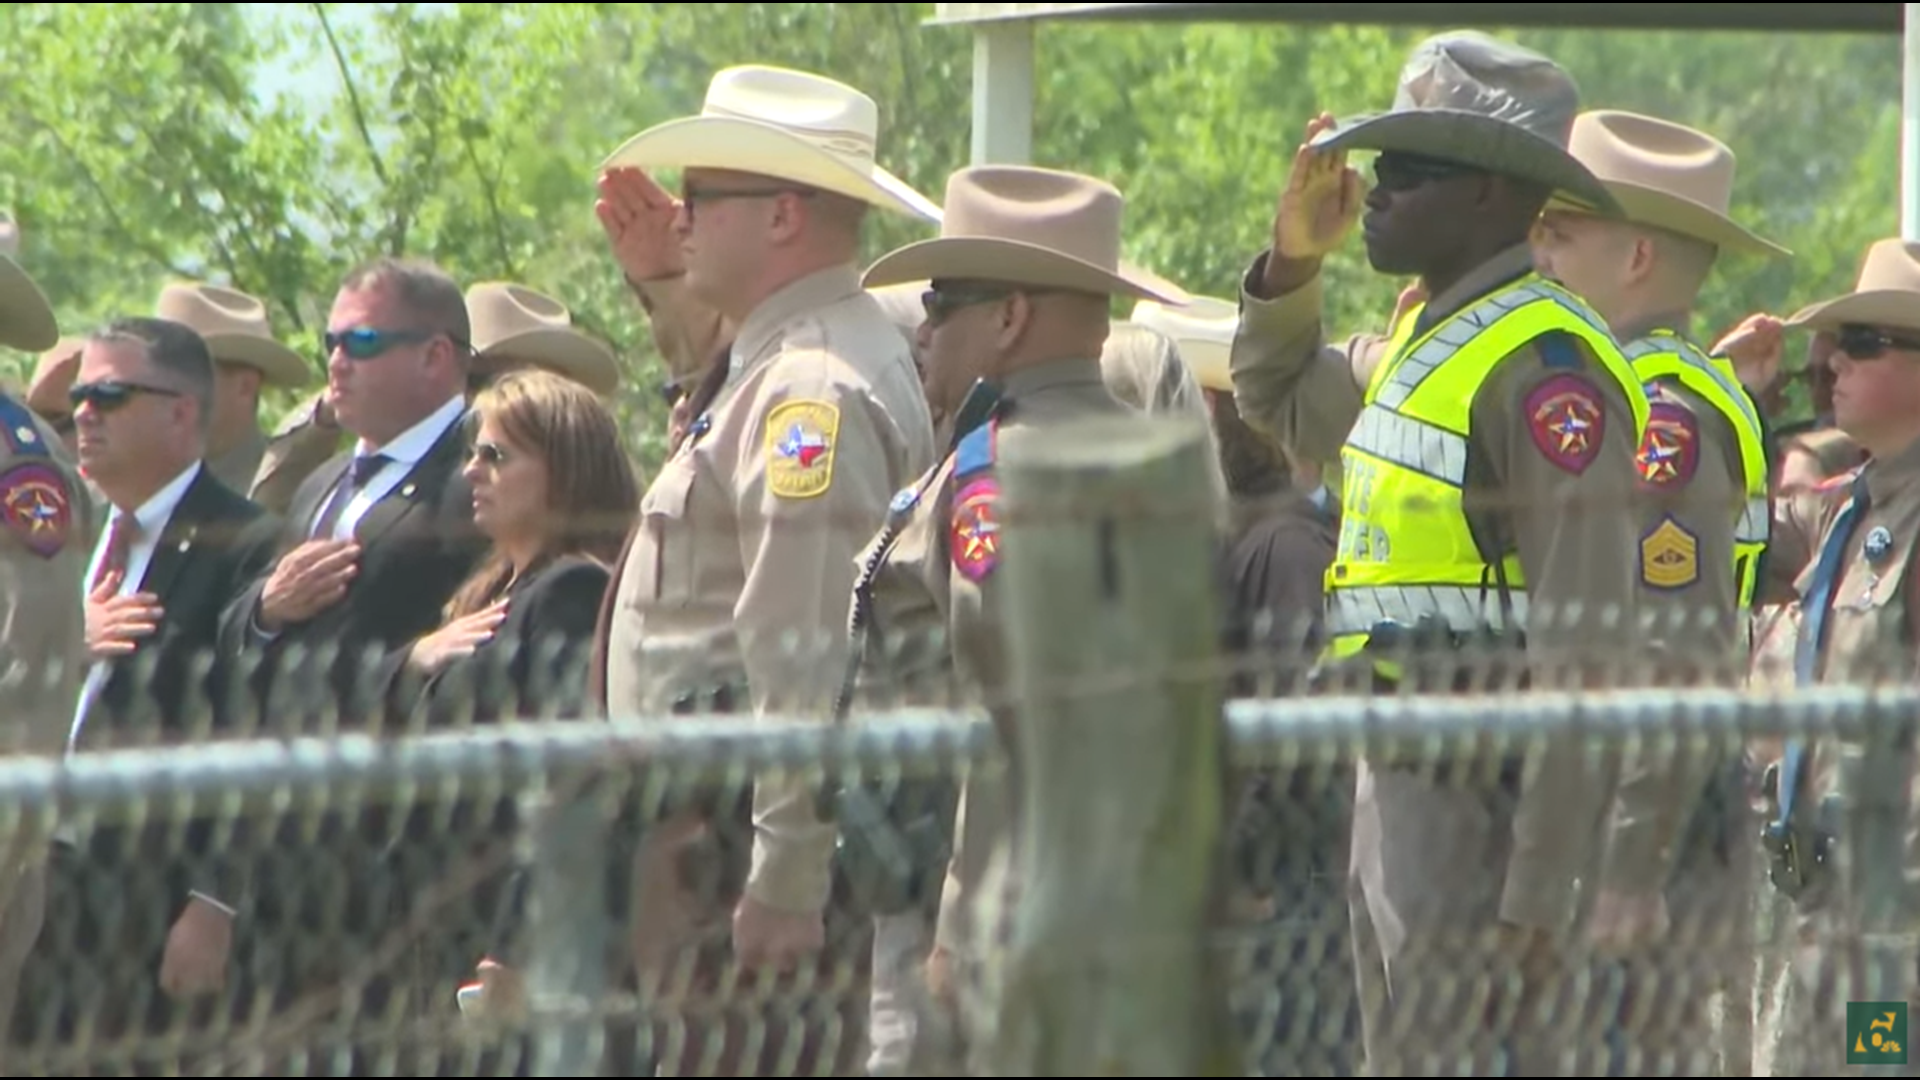 About 1,000 law enforcement vehicles escorted Walker's body to LaSalle Cemetery on FM 1953 where he will be laid to rest, DPS told 6 News.